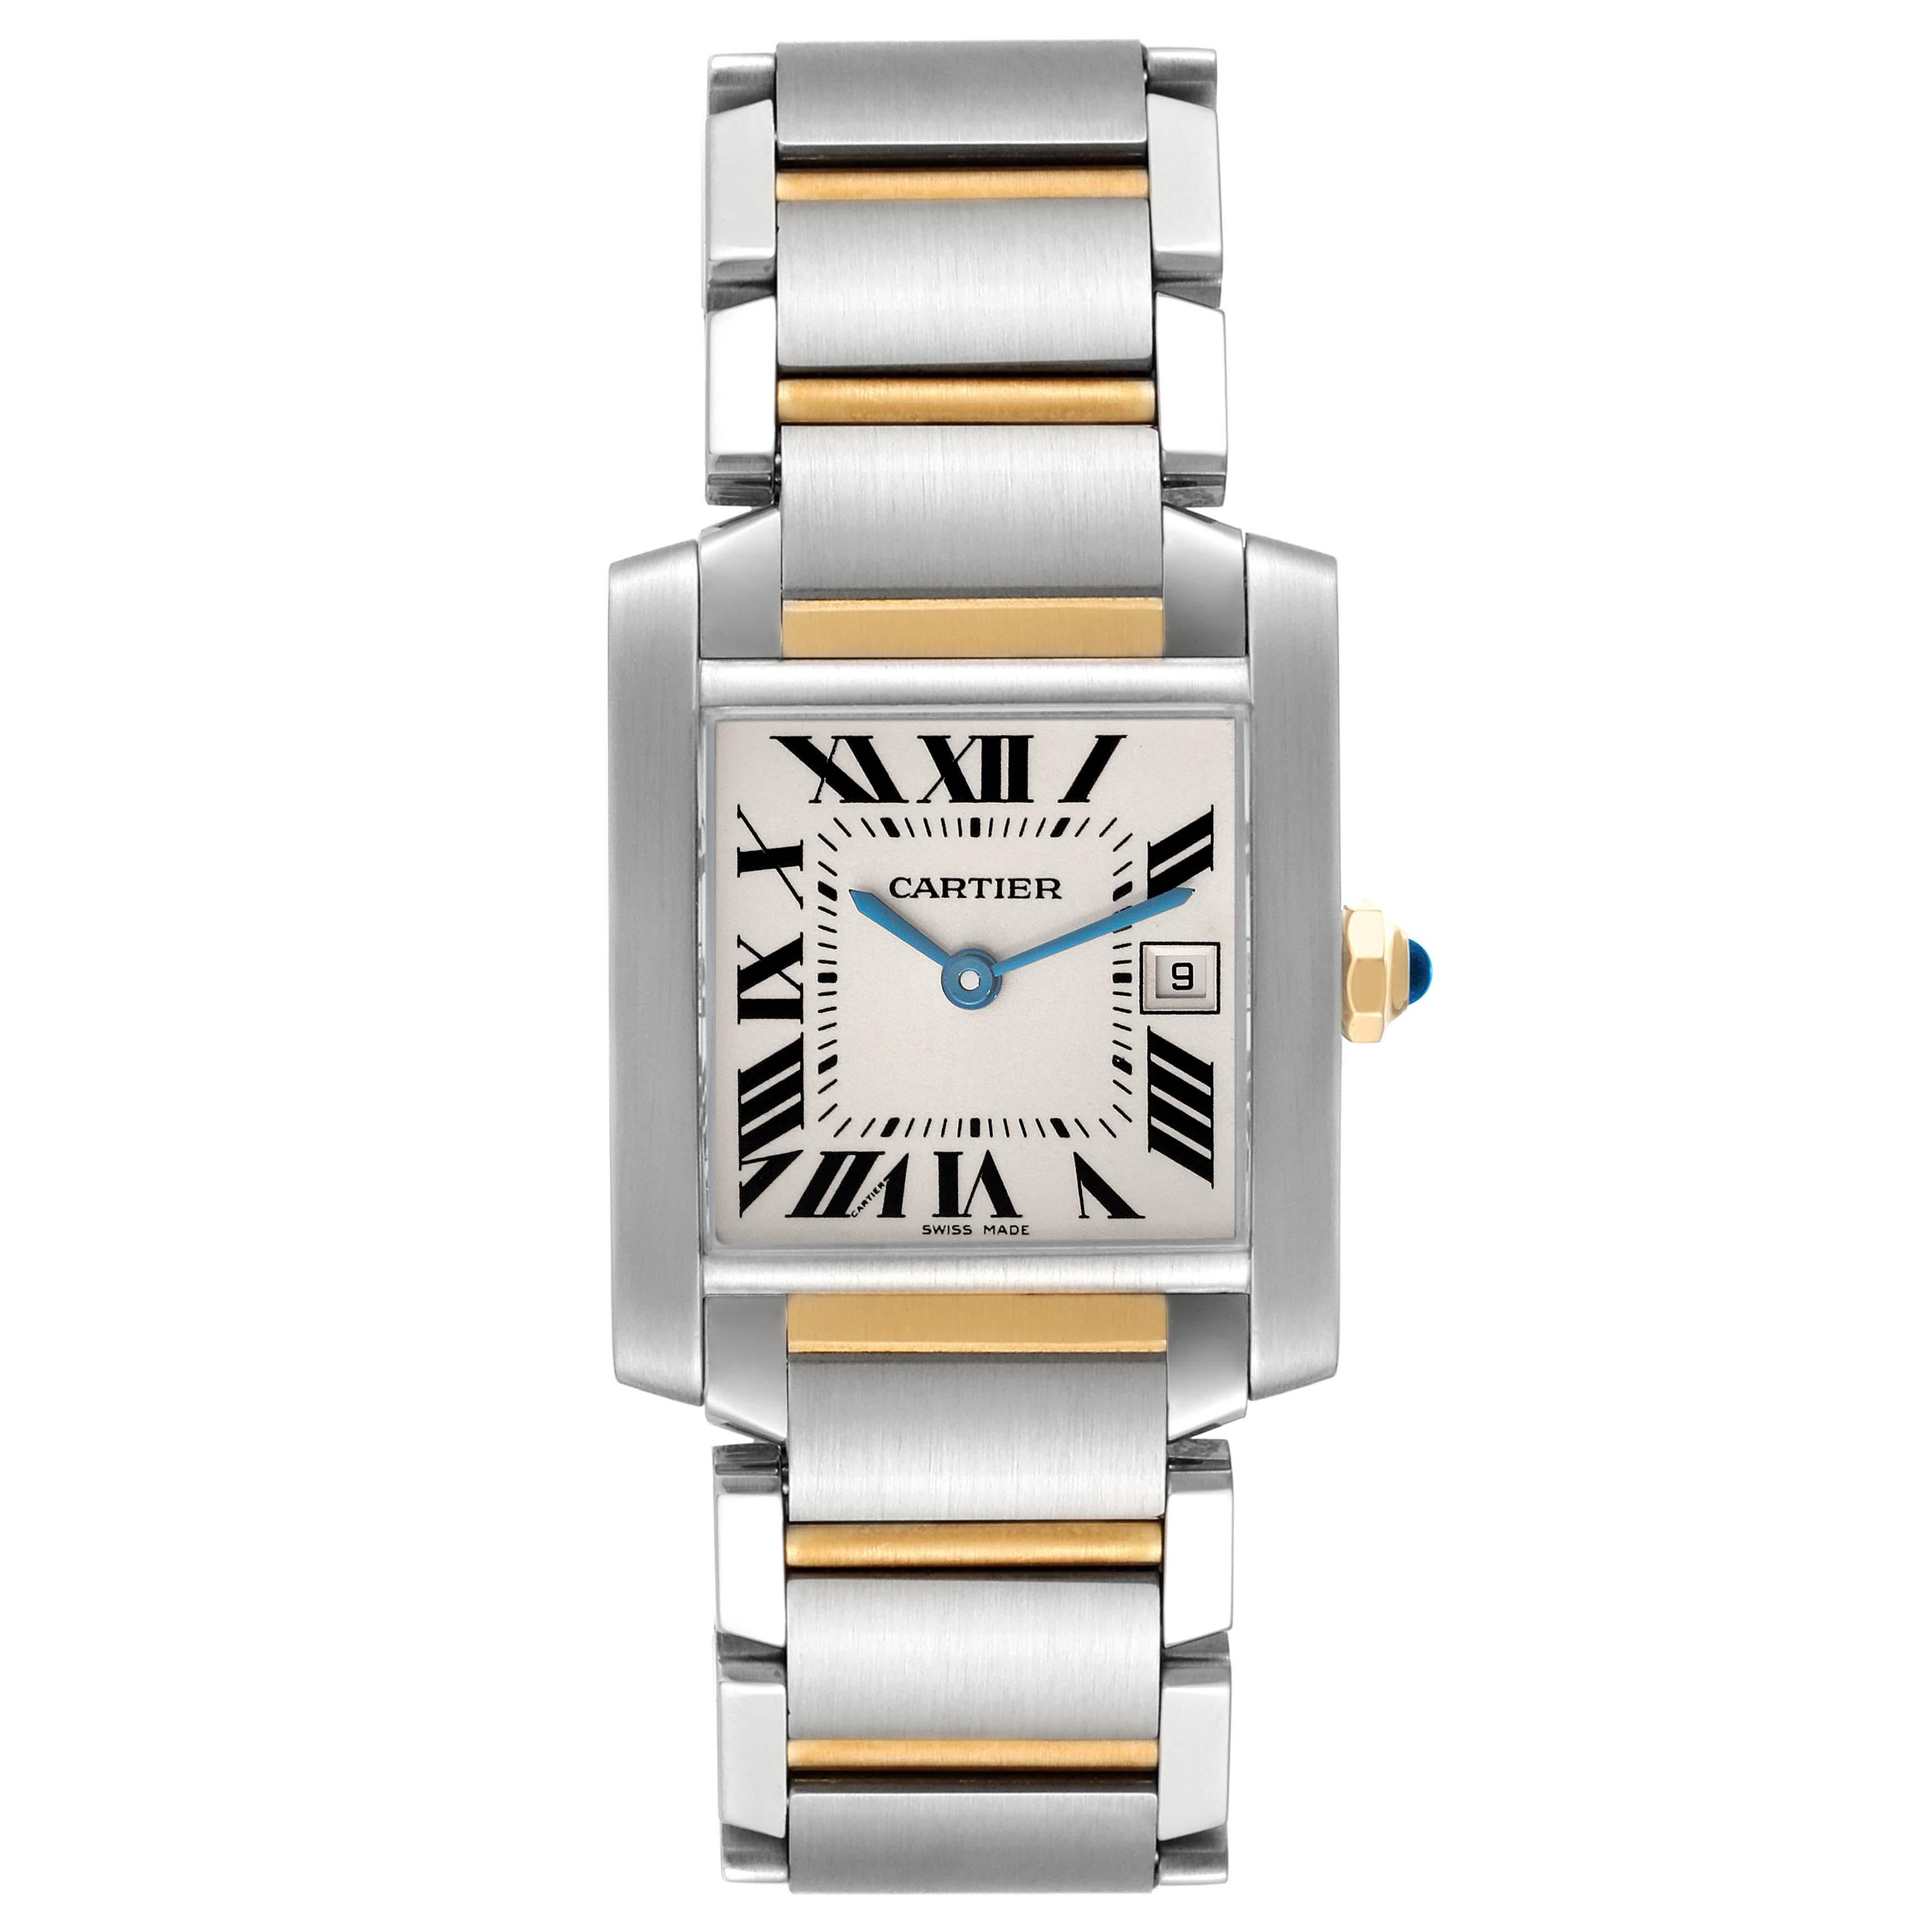 Cartier Tank Francaise Midsize Steel Yellow Gold Ladies Watch W51012Q4 Box Papers. Quartz movement. Rectangular stainless steel 25.0 x 30.0 mm case. Octagonal 18k yellow gold crown set with a blue spinel cabochon. . Scratch resistant sapphire